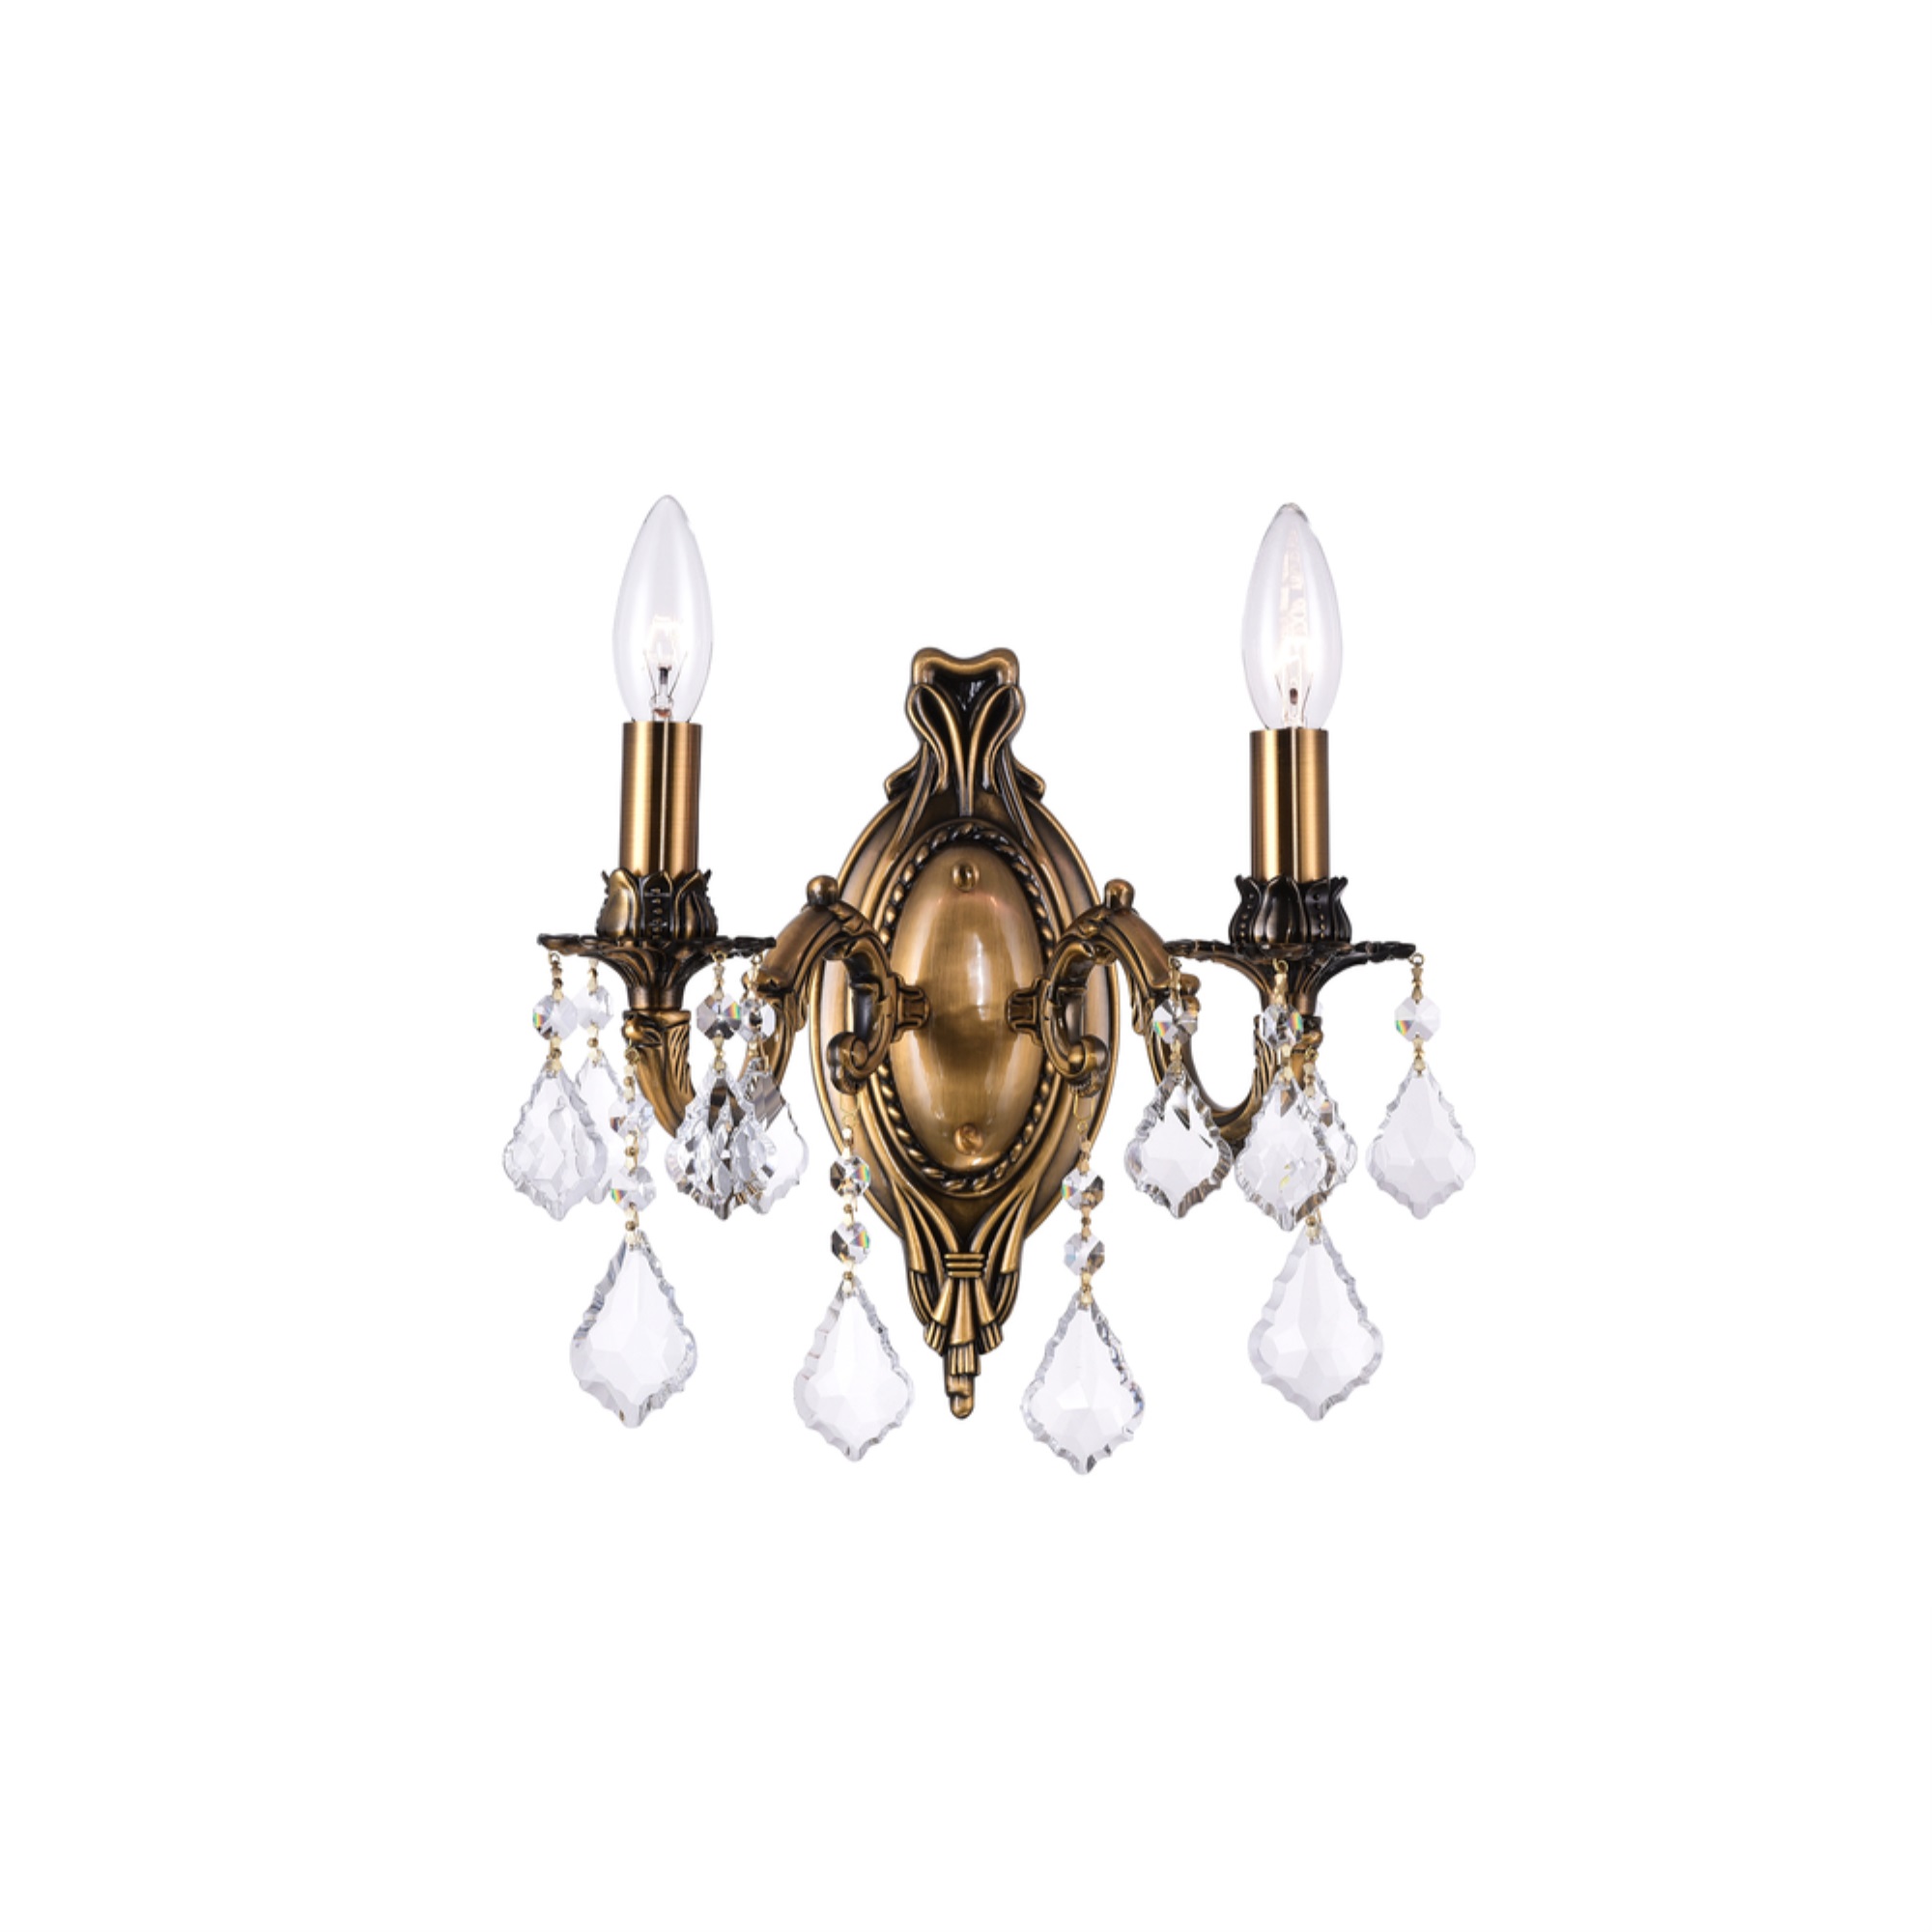 CWI Lighting 2 Light Wall Sconce With French Gold finish